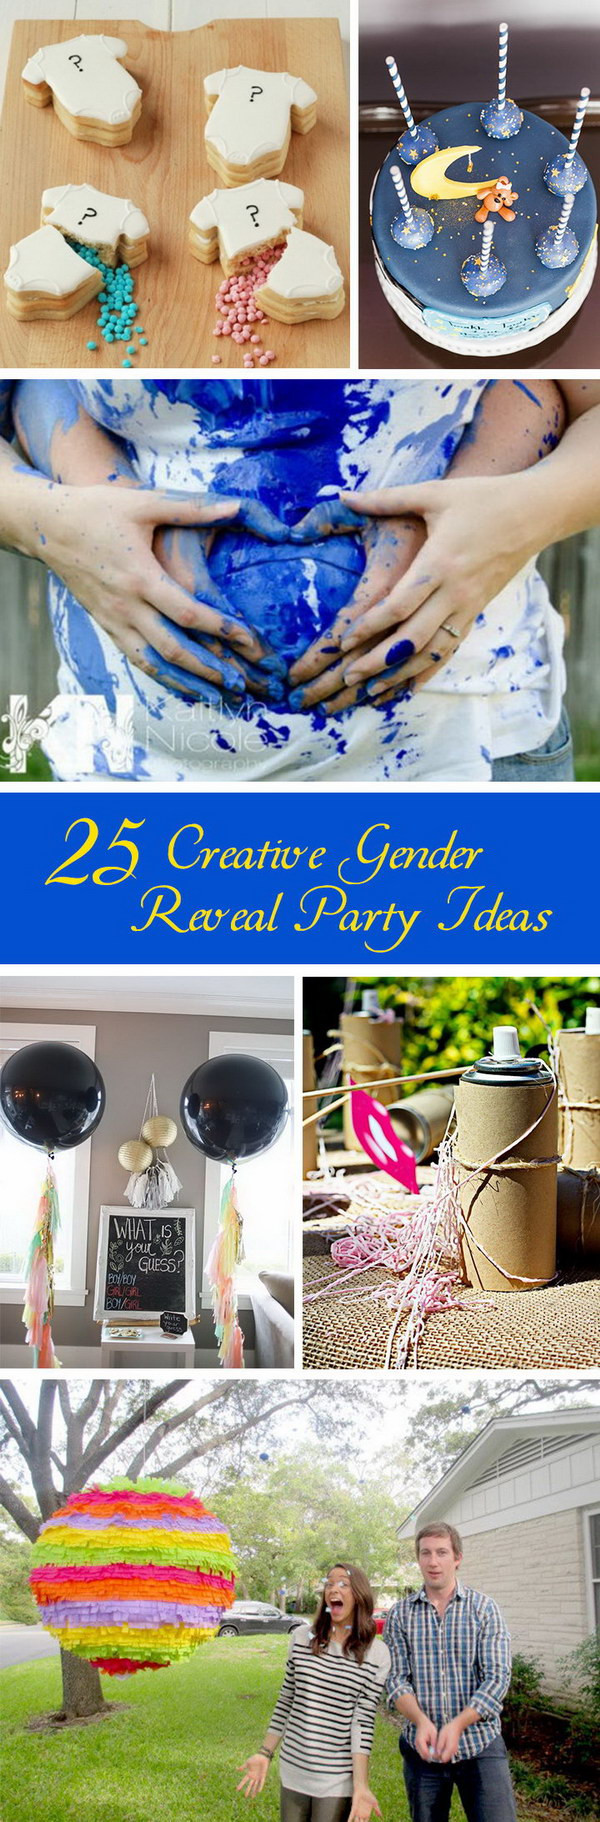 Gender Party Reveal Ideas
 25 Creative Gender Reveal Party Ideas Hative